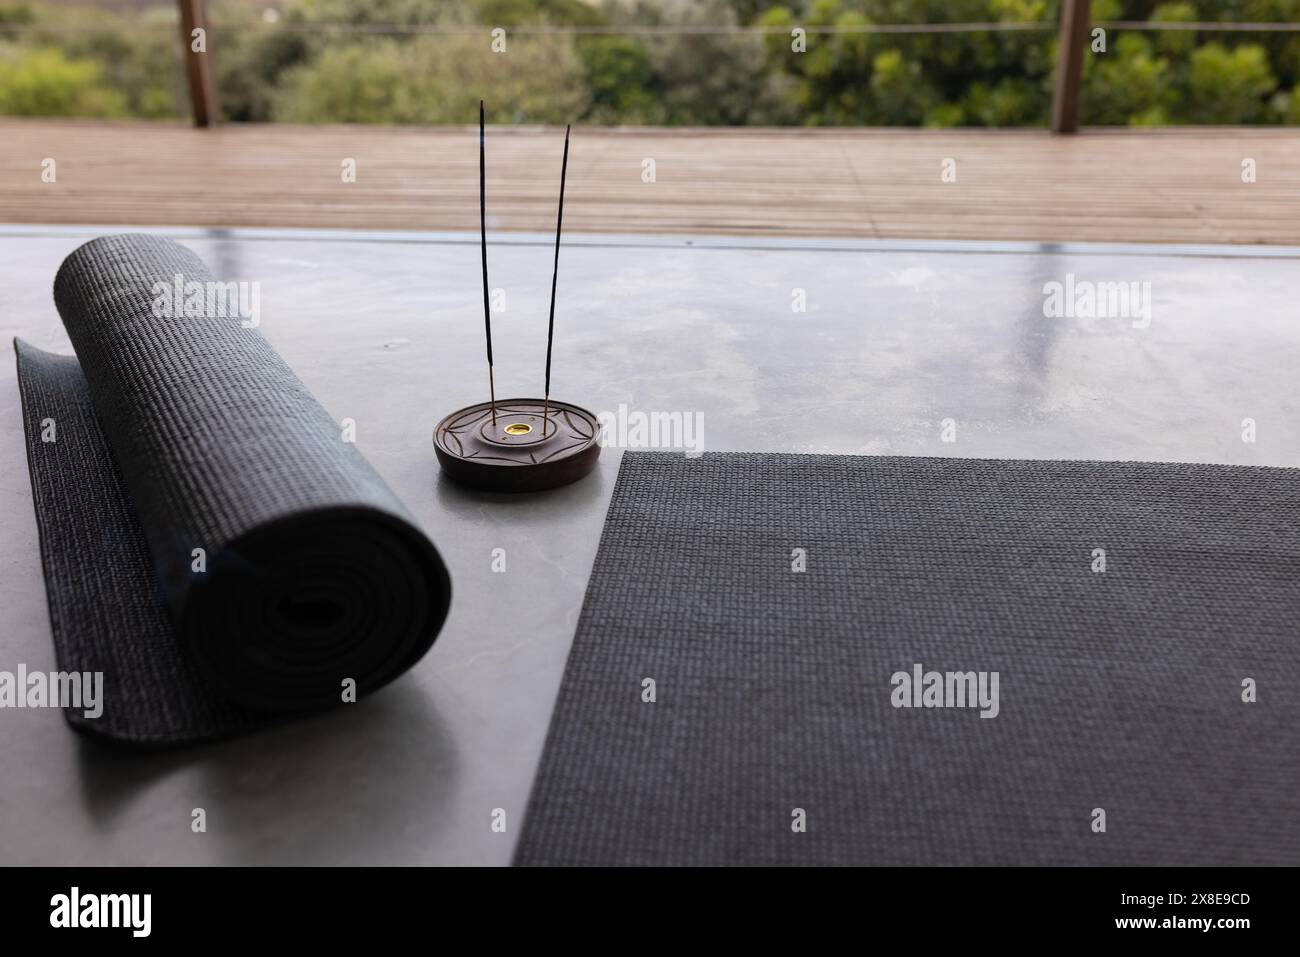 At home, yoga mat and incense burner resting on a sleek surface Stock Photo